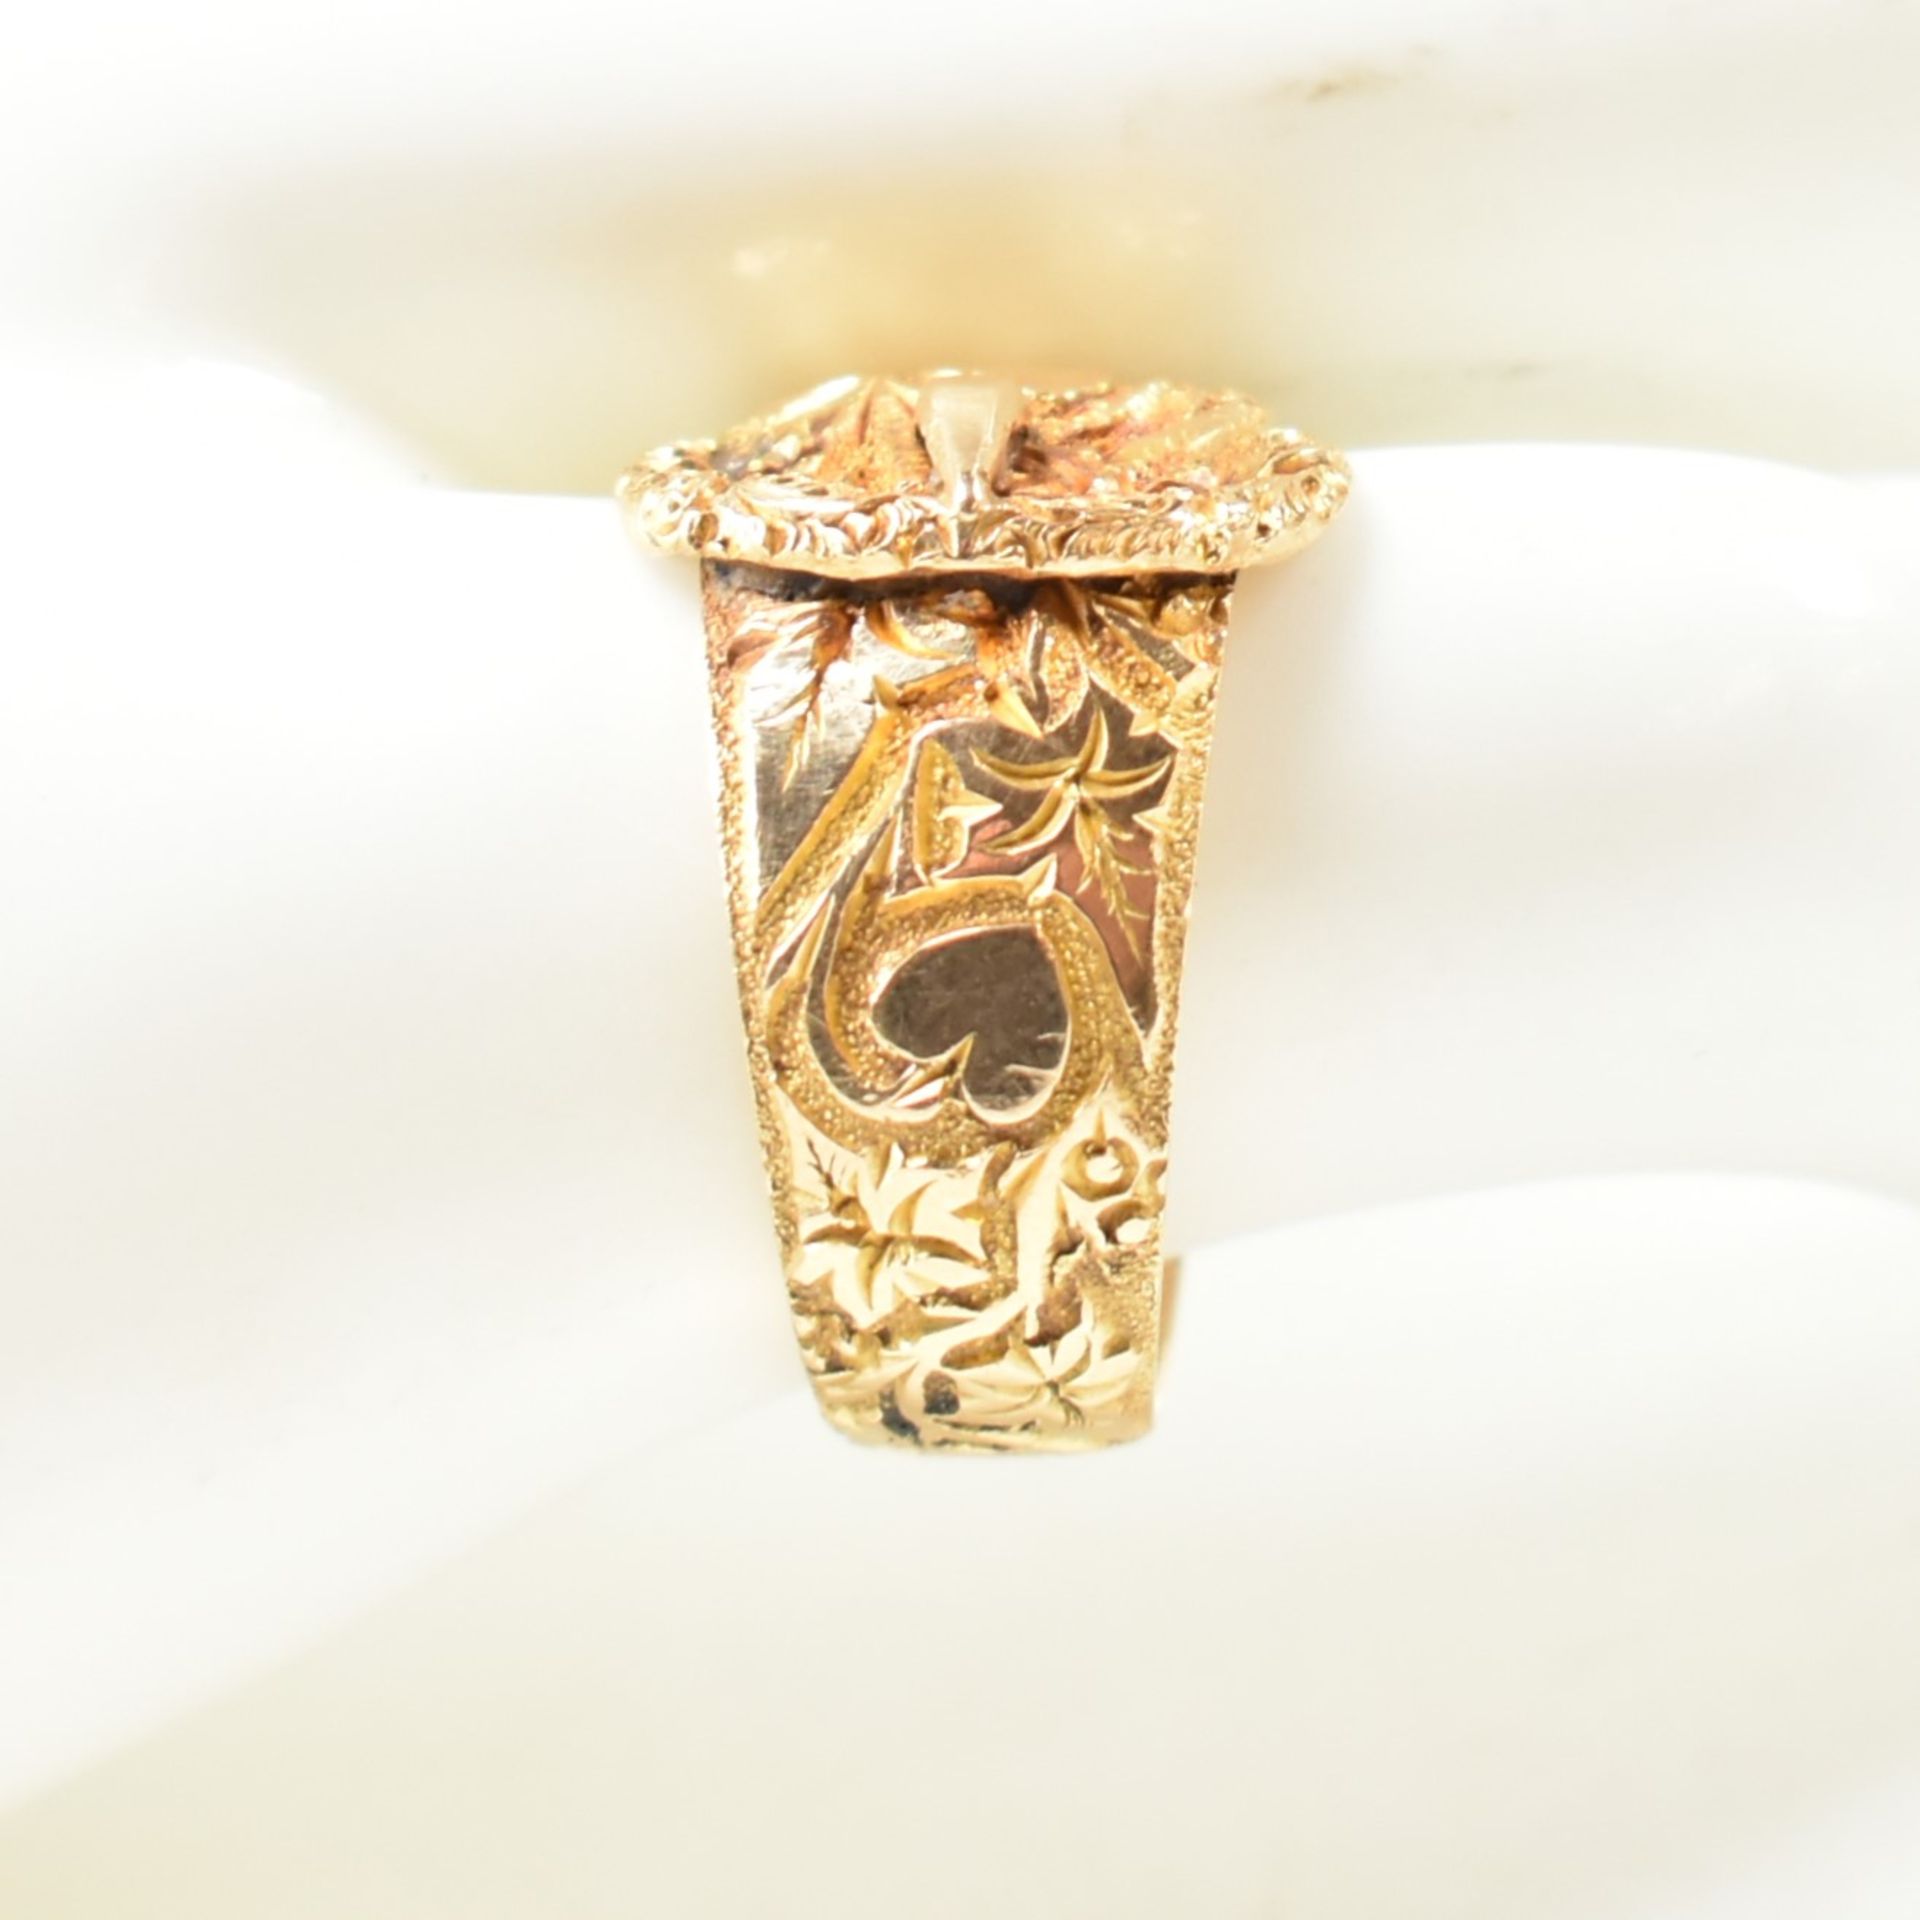 EDWARDIAN HALLMARKED 18CT GOLD BUCKLE RING - Image 9 of 9